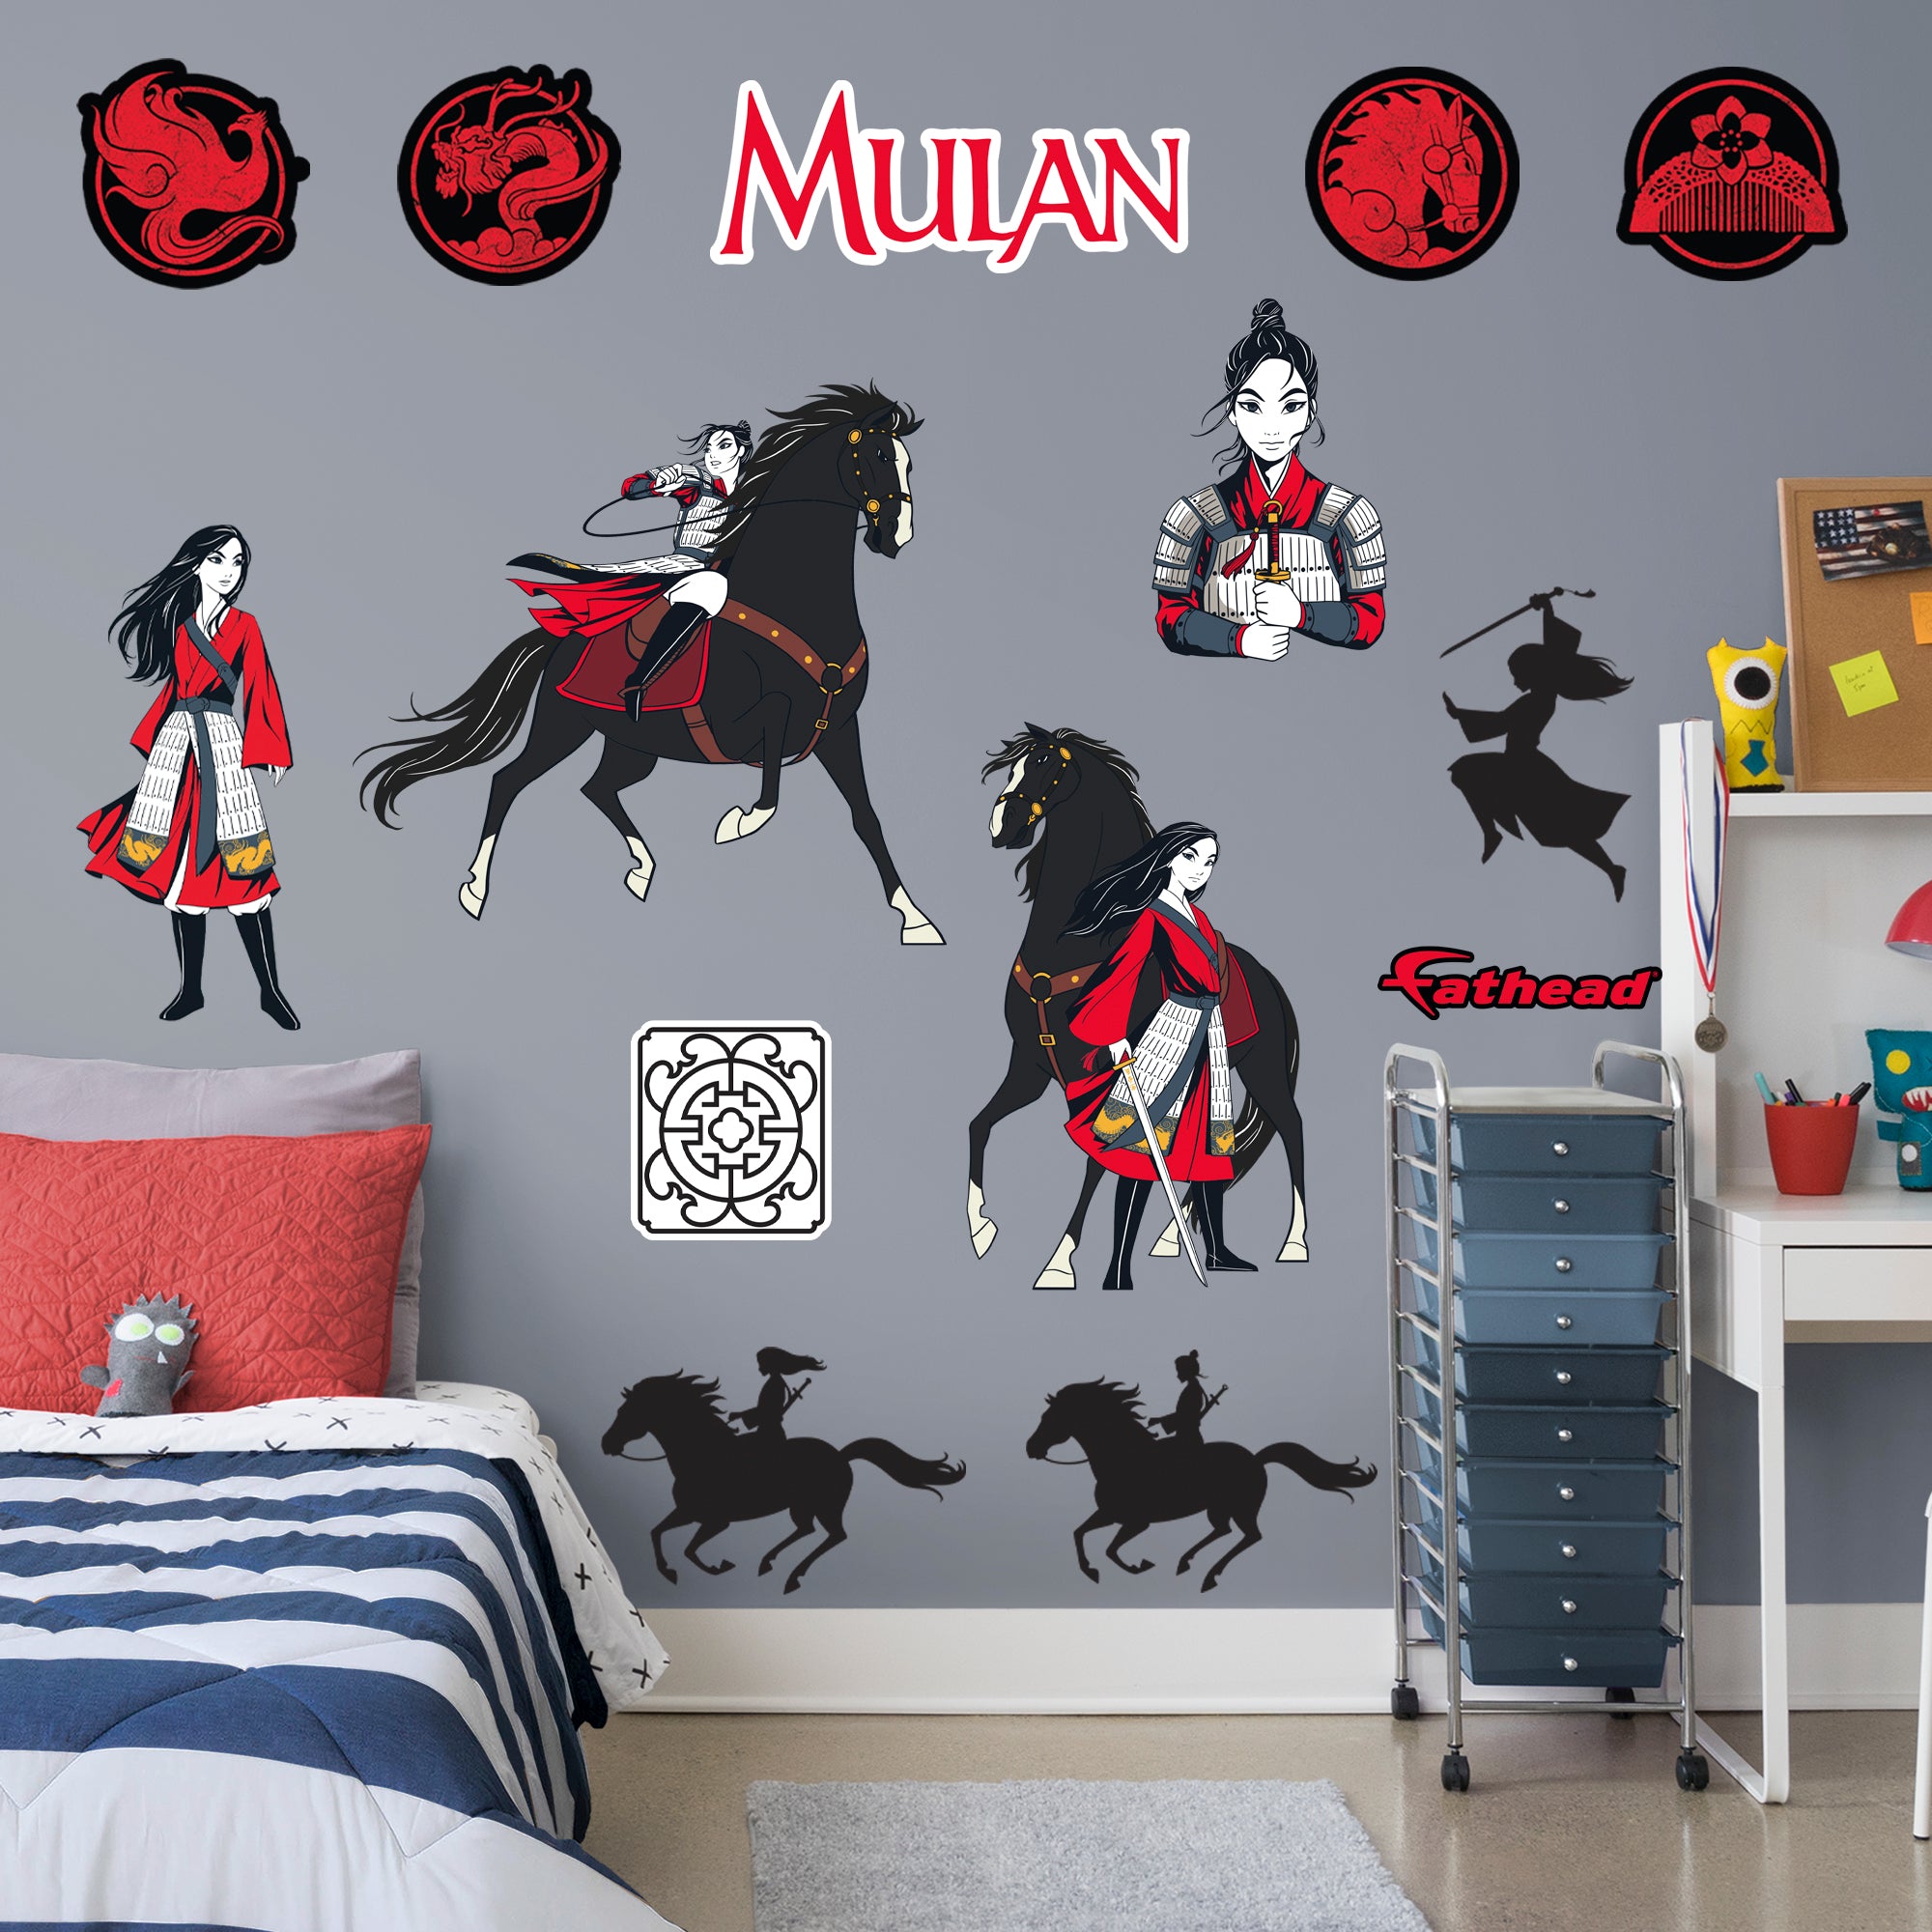 Mulan Collection - Illustrated-Officially Licensed Disney Removable Wall Decal by Fathead | Vinyl